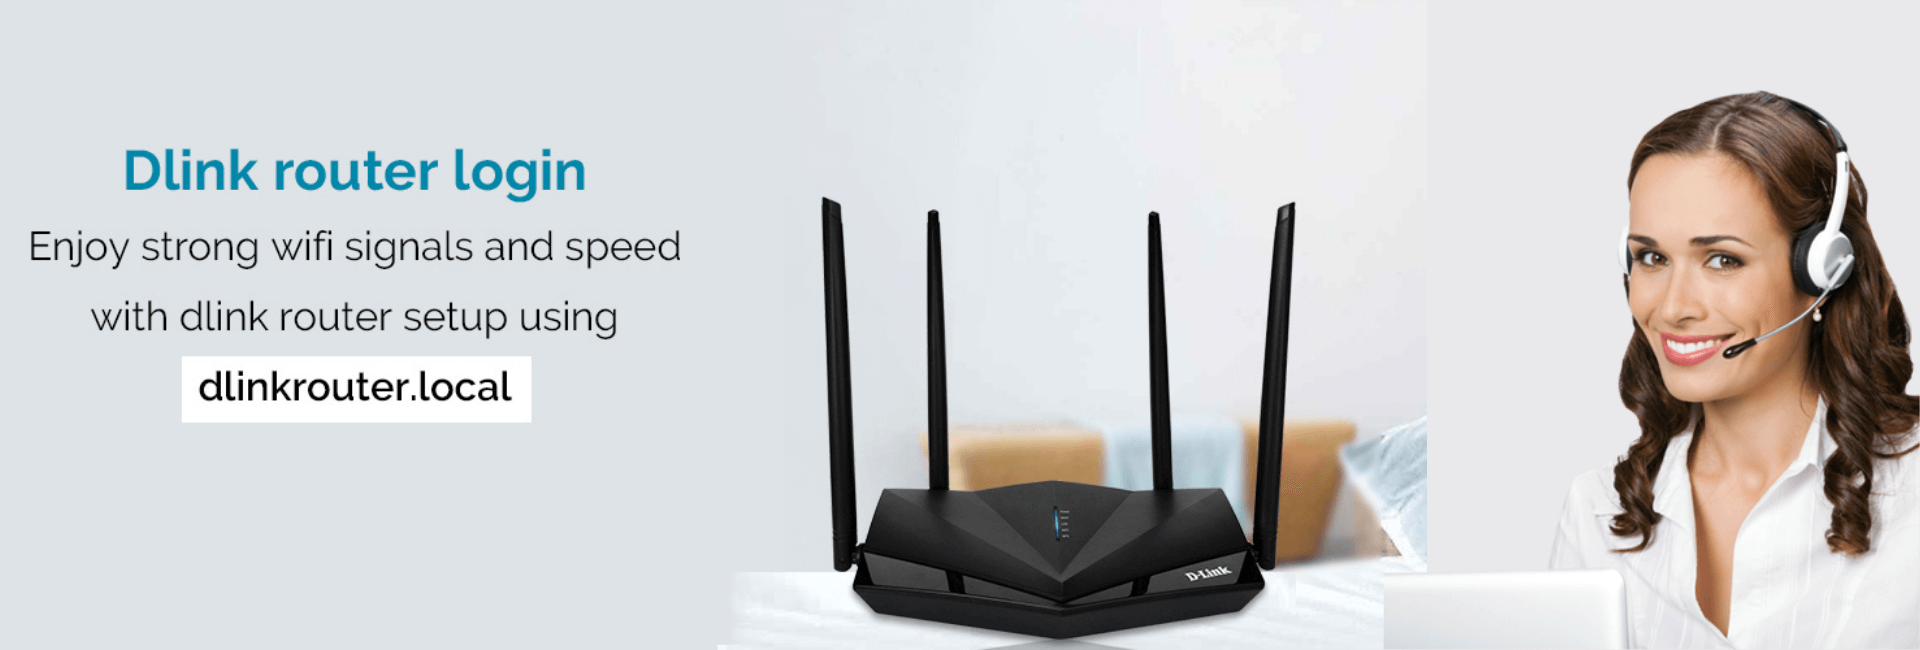 dlink router local